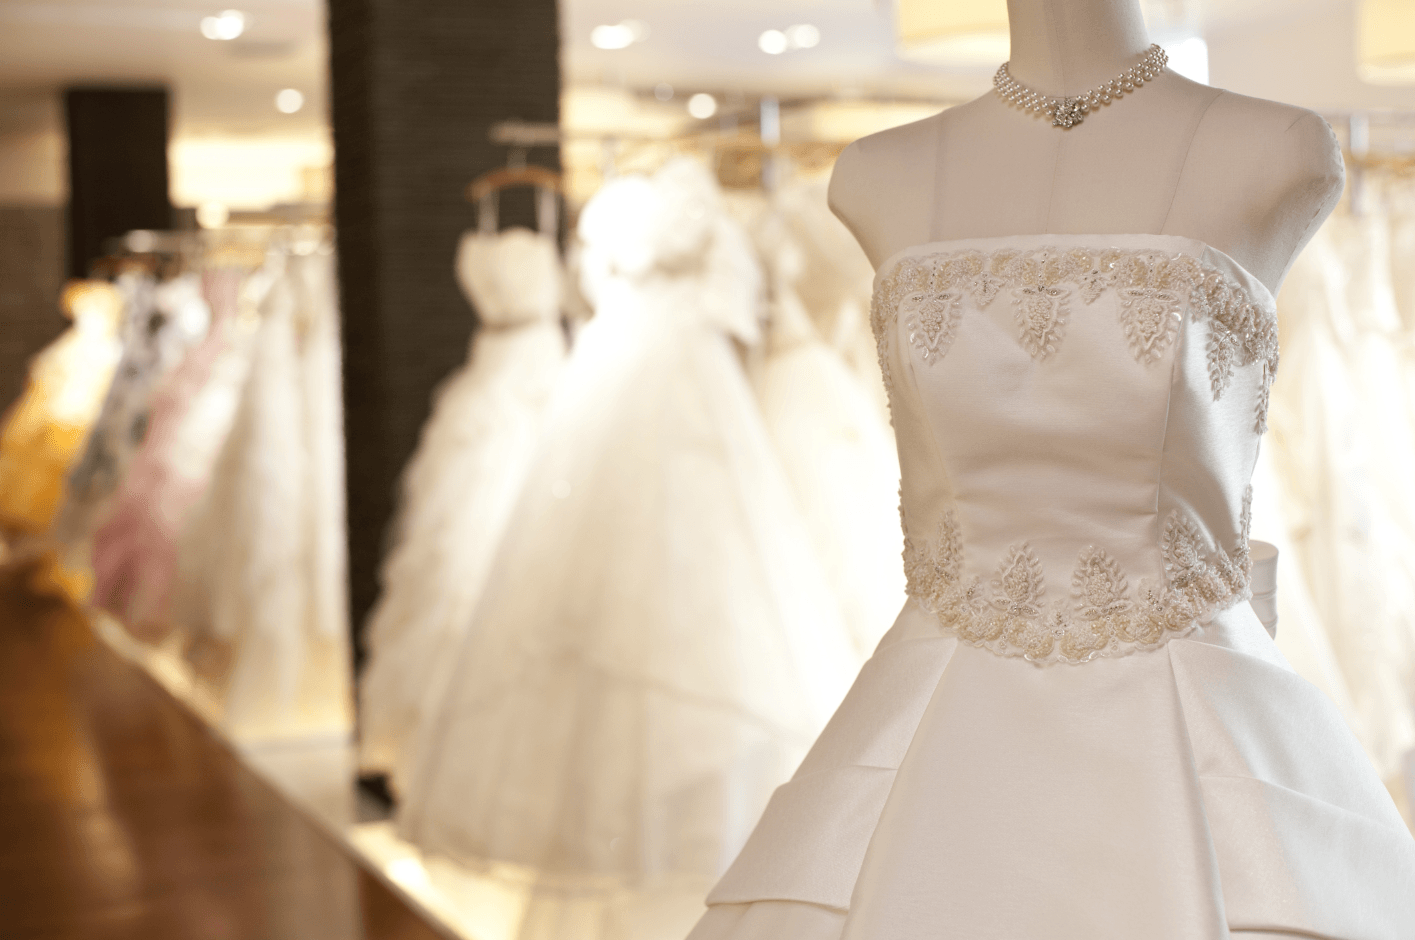 How To Get The Most Out Of Your Boston Bridal Gown Shopping Experience